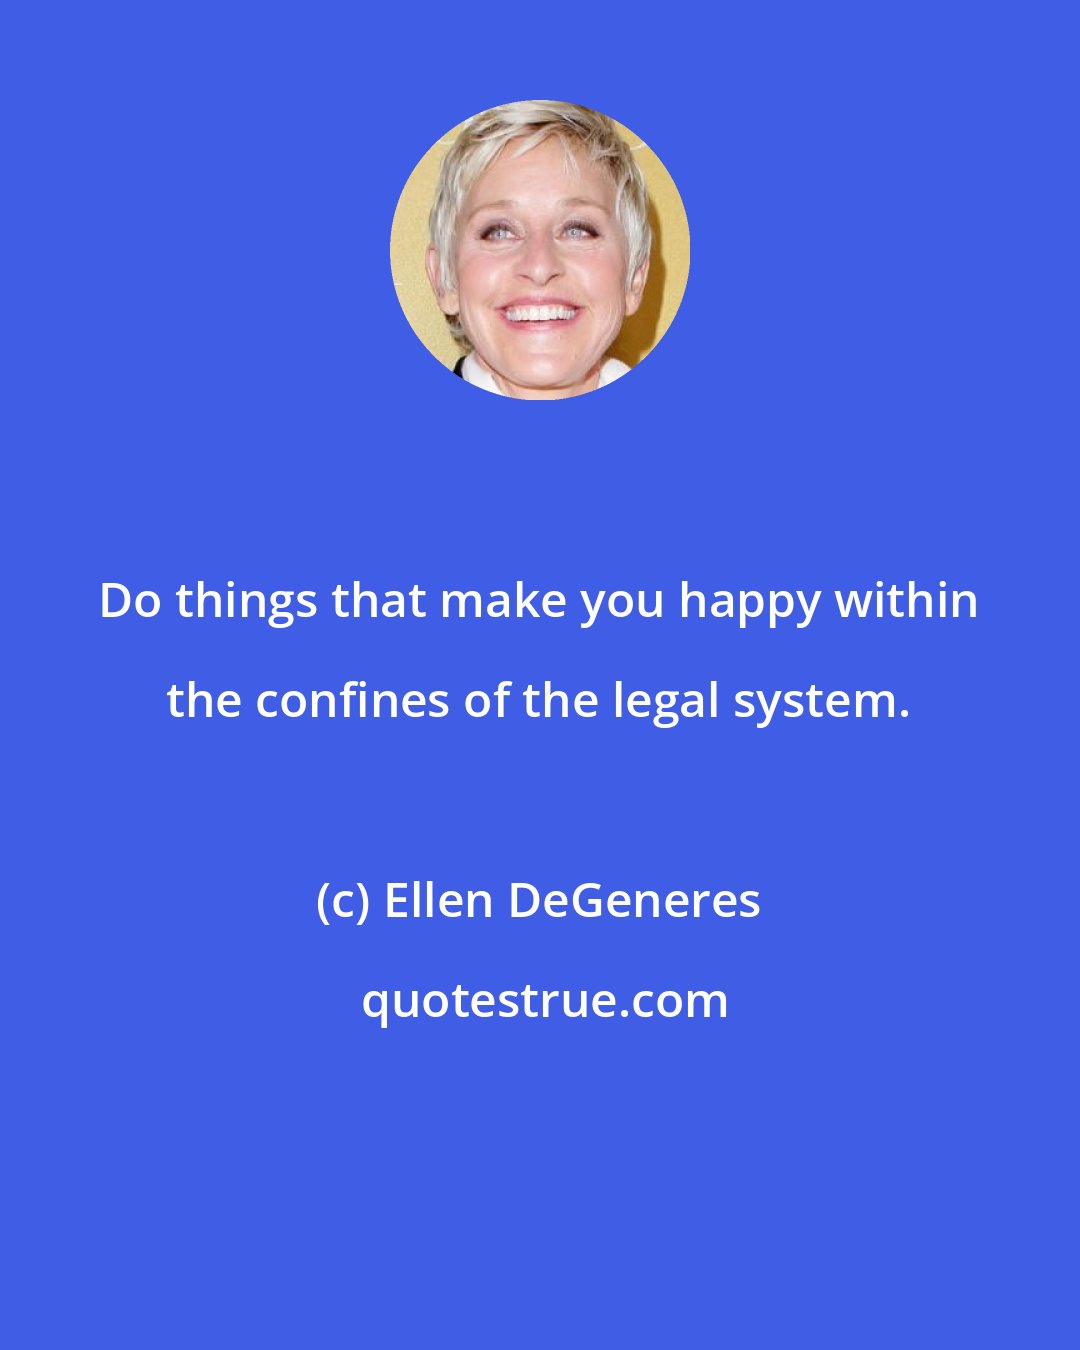 Ellen DeGeneres: Do things that make you happy within the confines of the legal system.